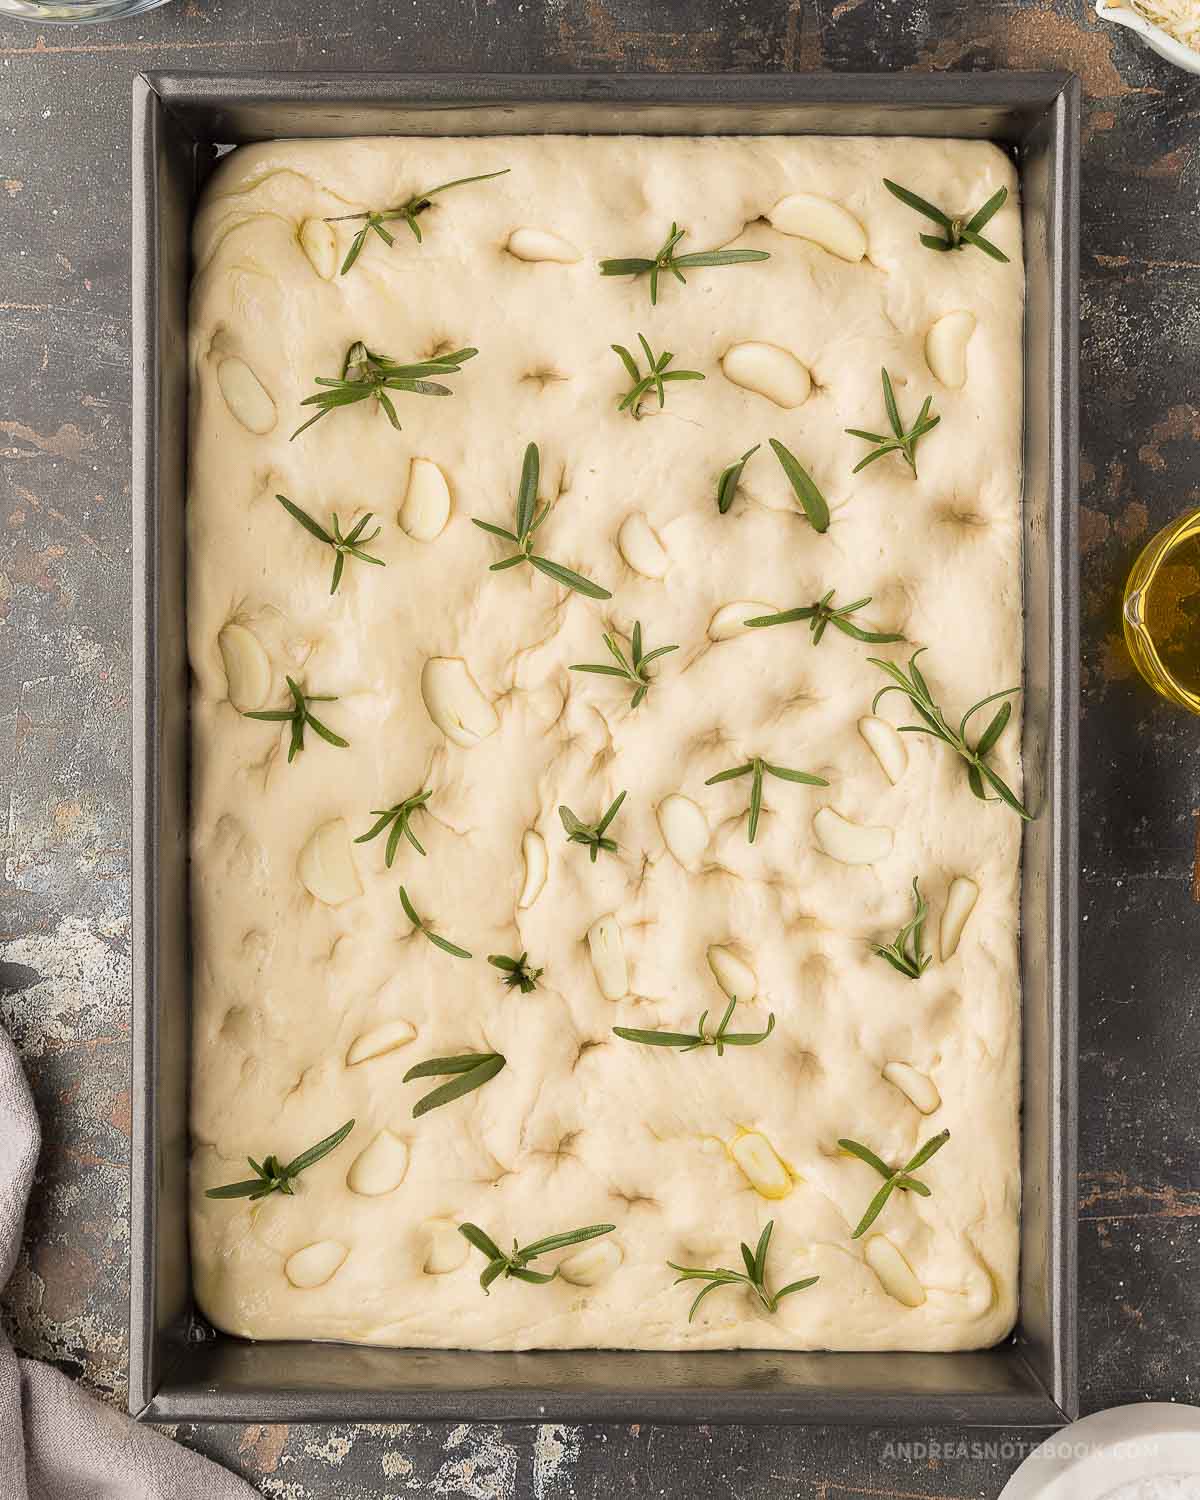 Garlic and rosemary on top of raw focaccia bread dough.